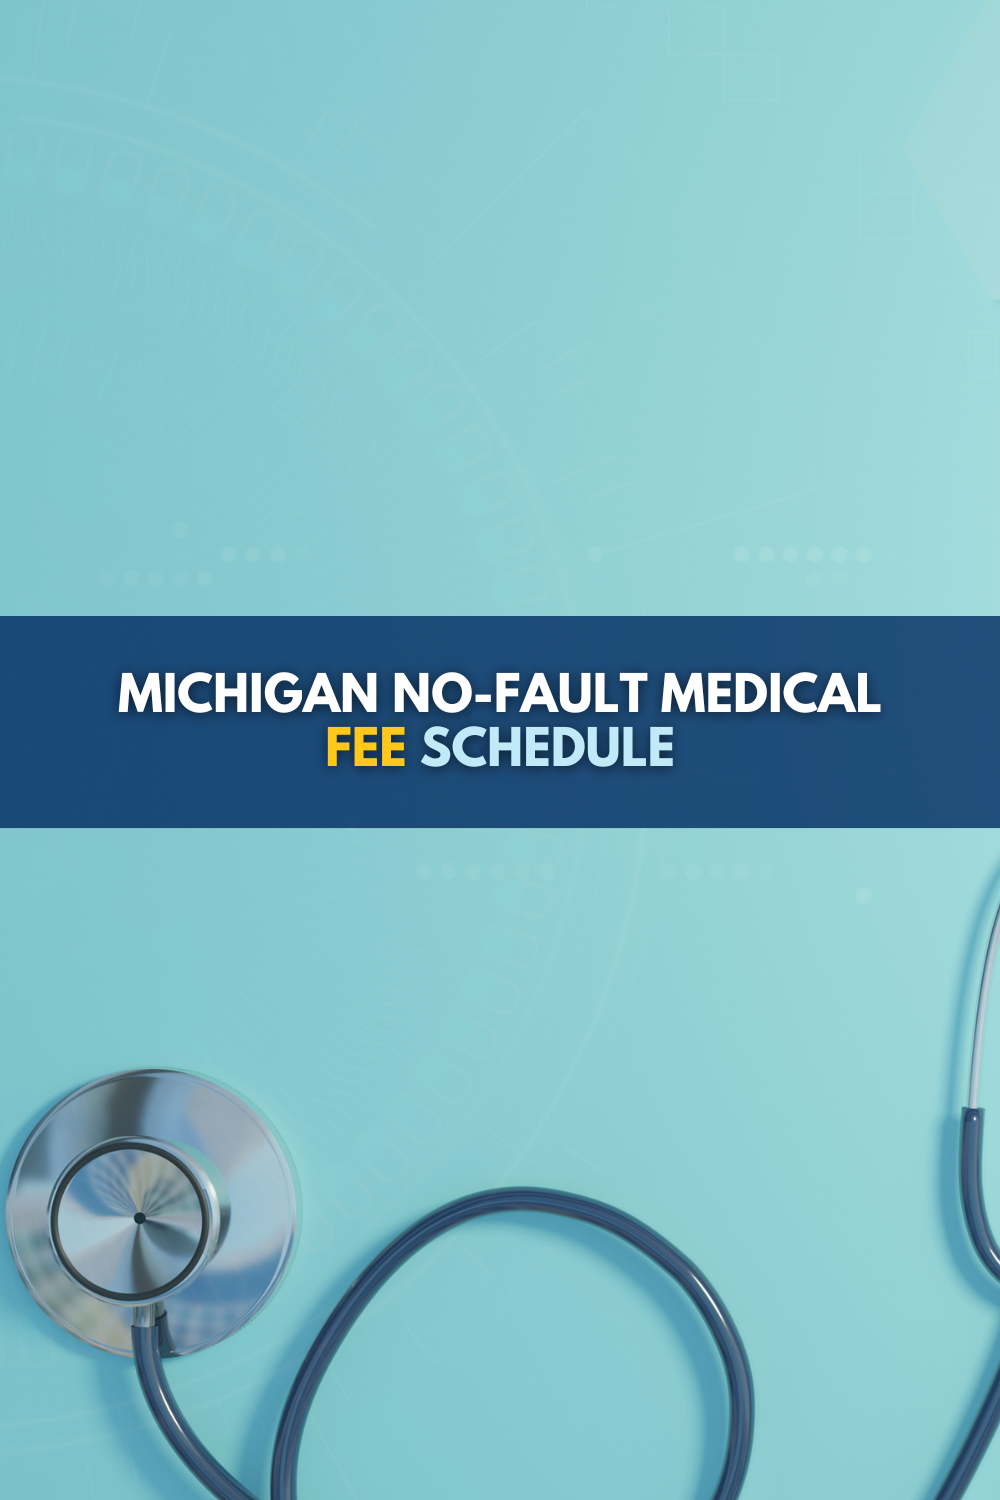 Michigan No-Fault Medical Fee Schedule: Here\'s What To Know